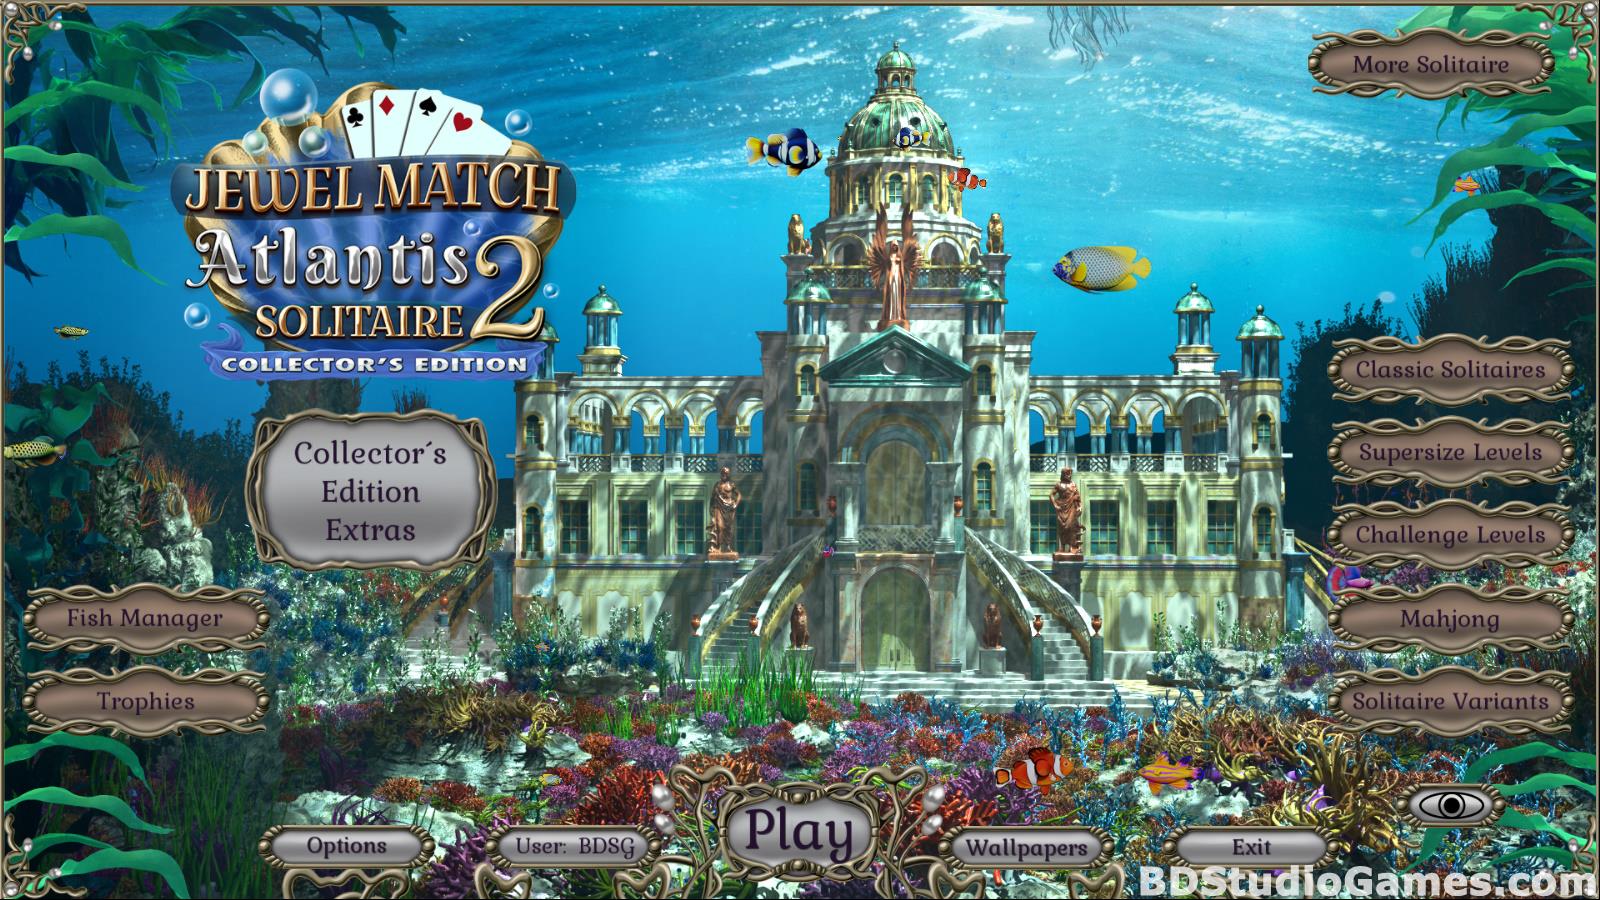 Jewel Match Solitaire: Atlantis 2 Collector's Edition Free Download Screenshots 01